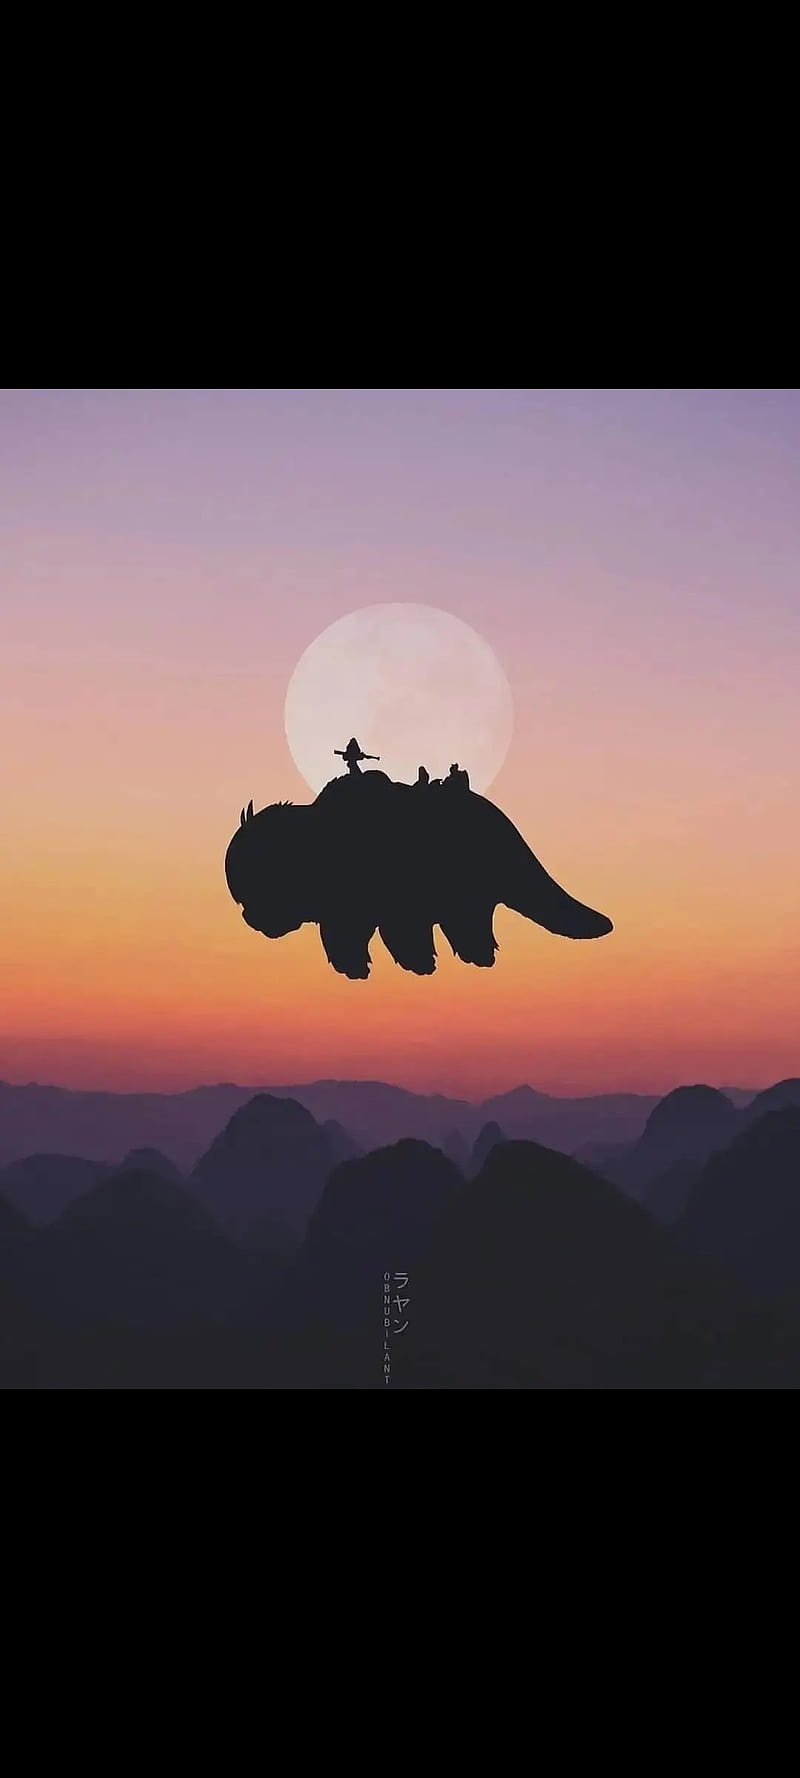 A journey, fly, Avatar the last airbender, aang, appa, Avatar, anime, HD phone wallpaper